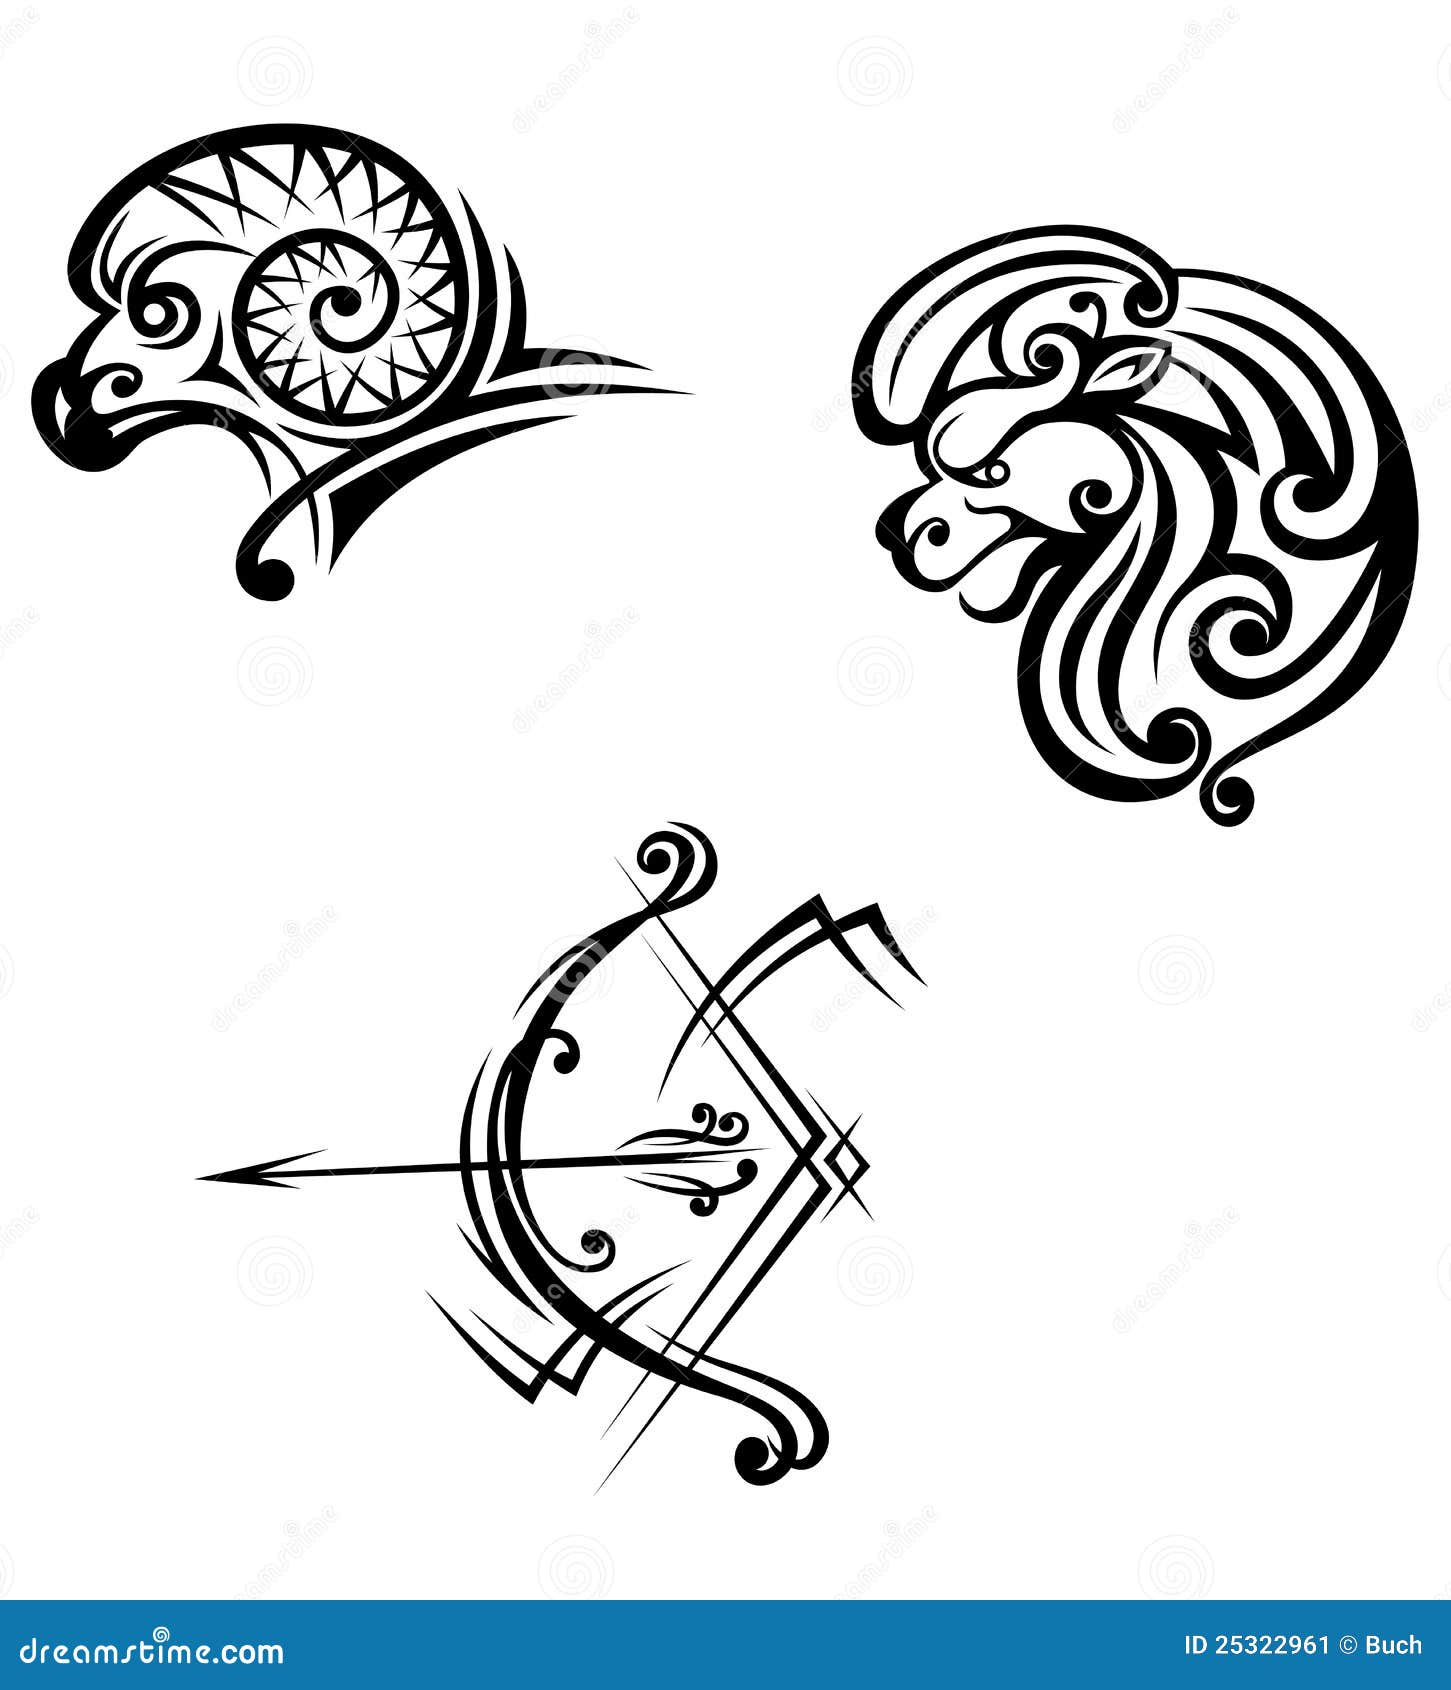 Best Tattoo For Your Zodiac Sign  MrInkwells